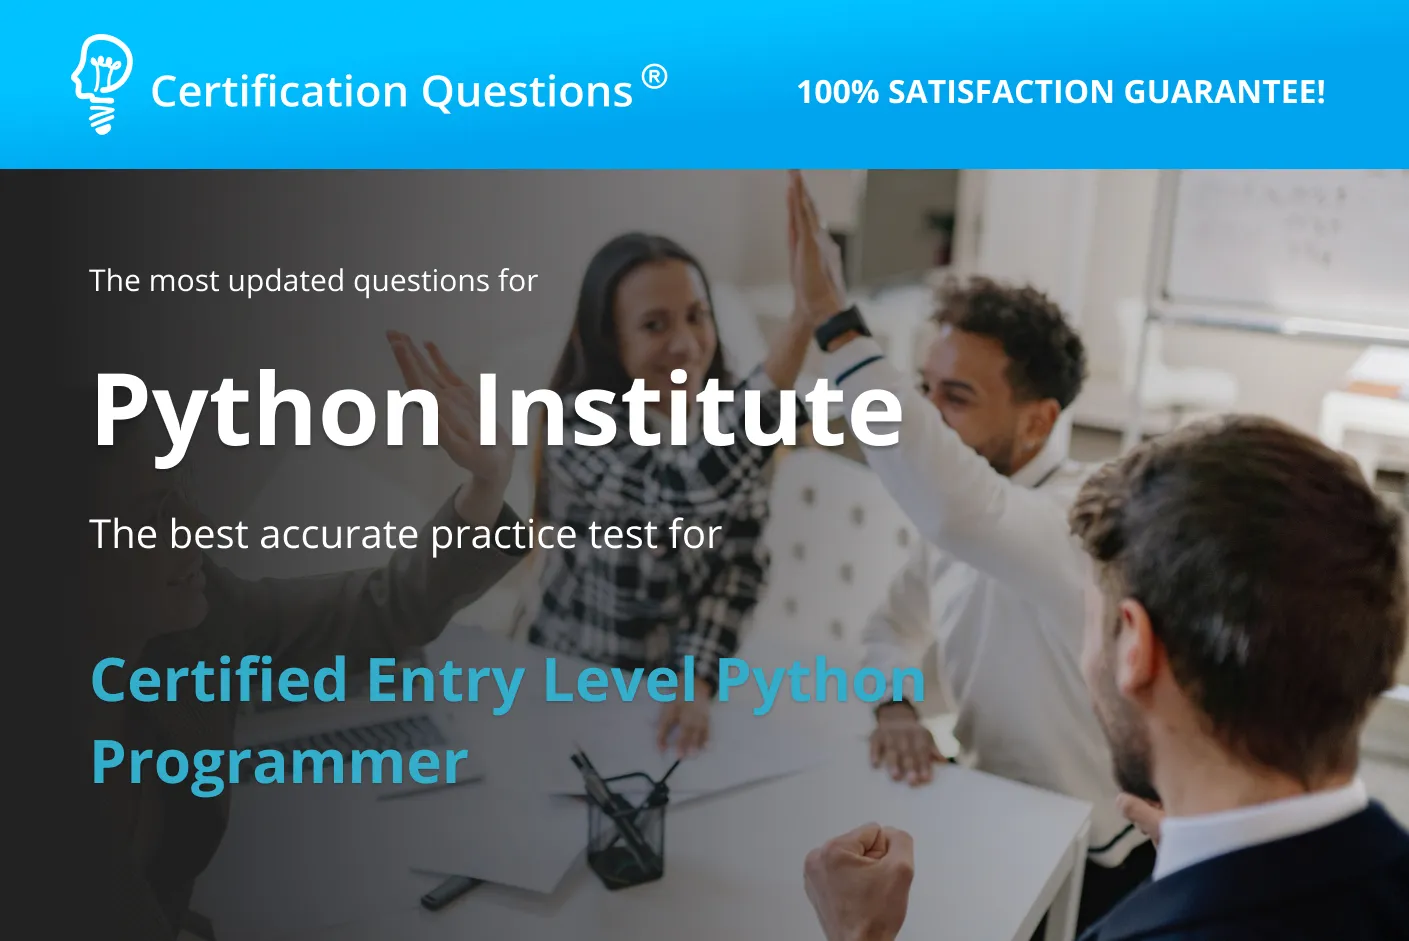 This guide is related to certified entry level python programmer certification